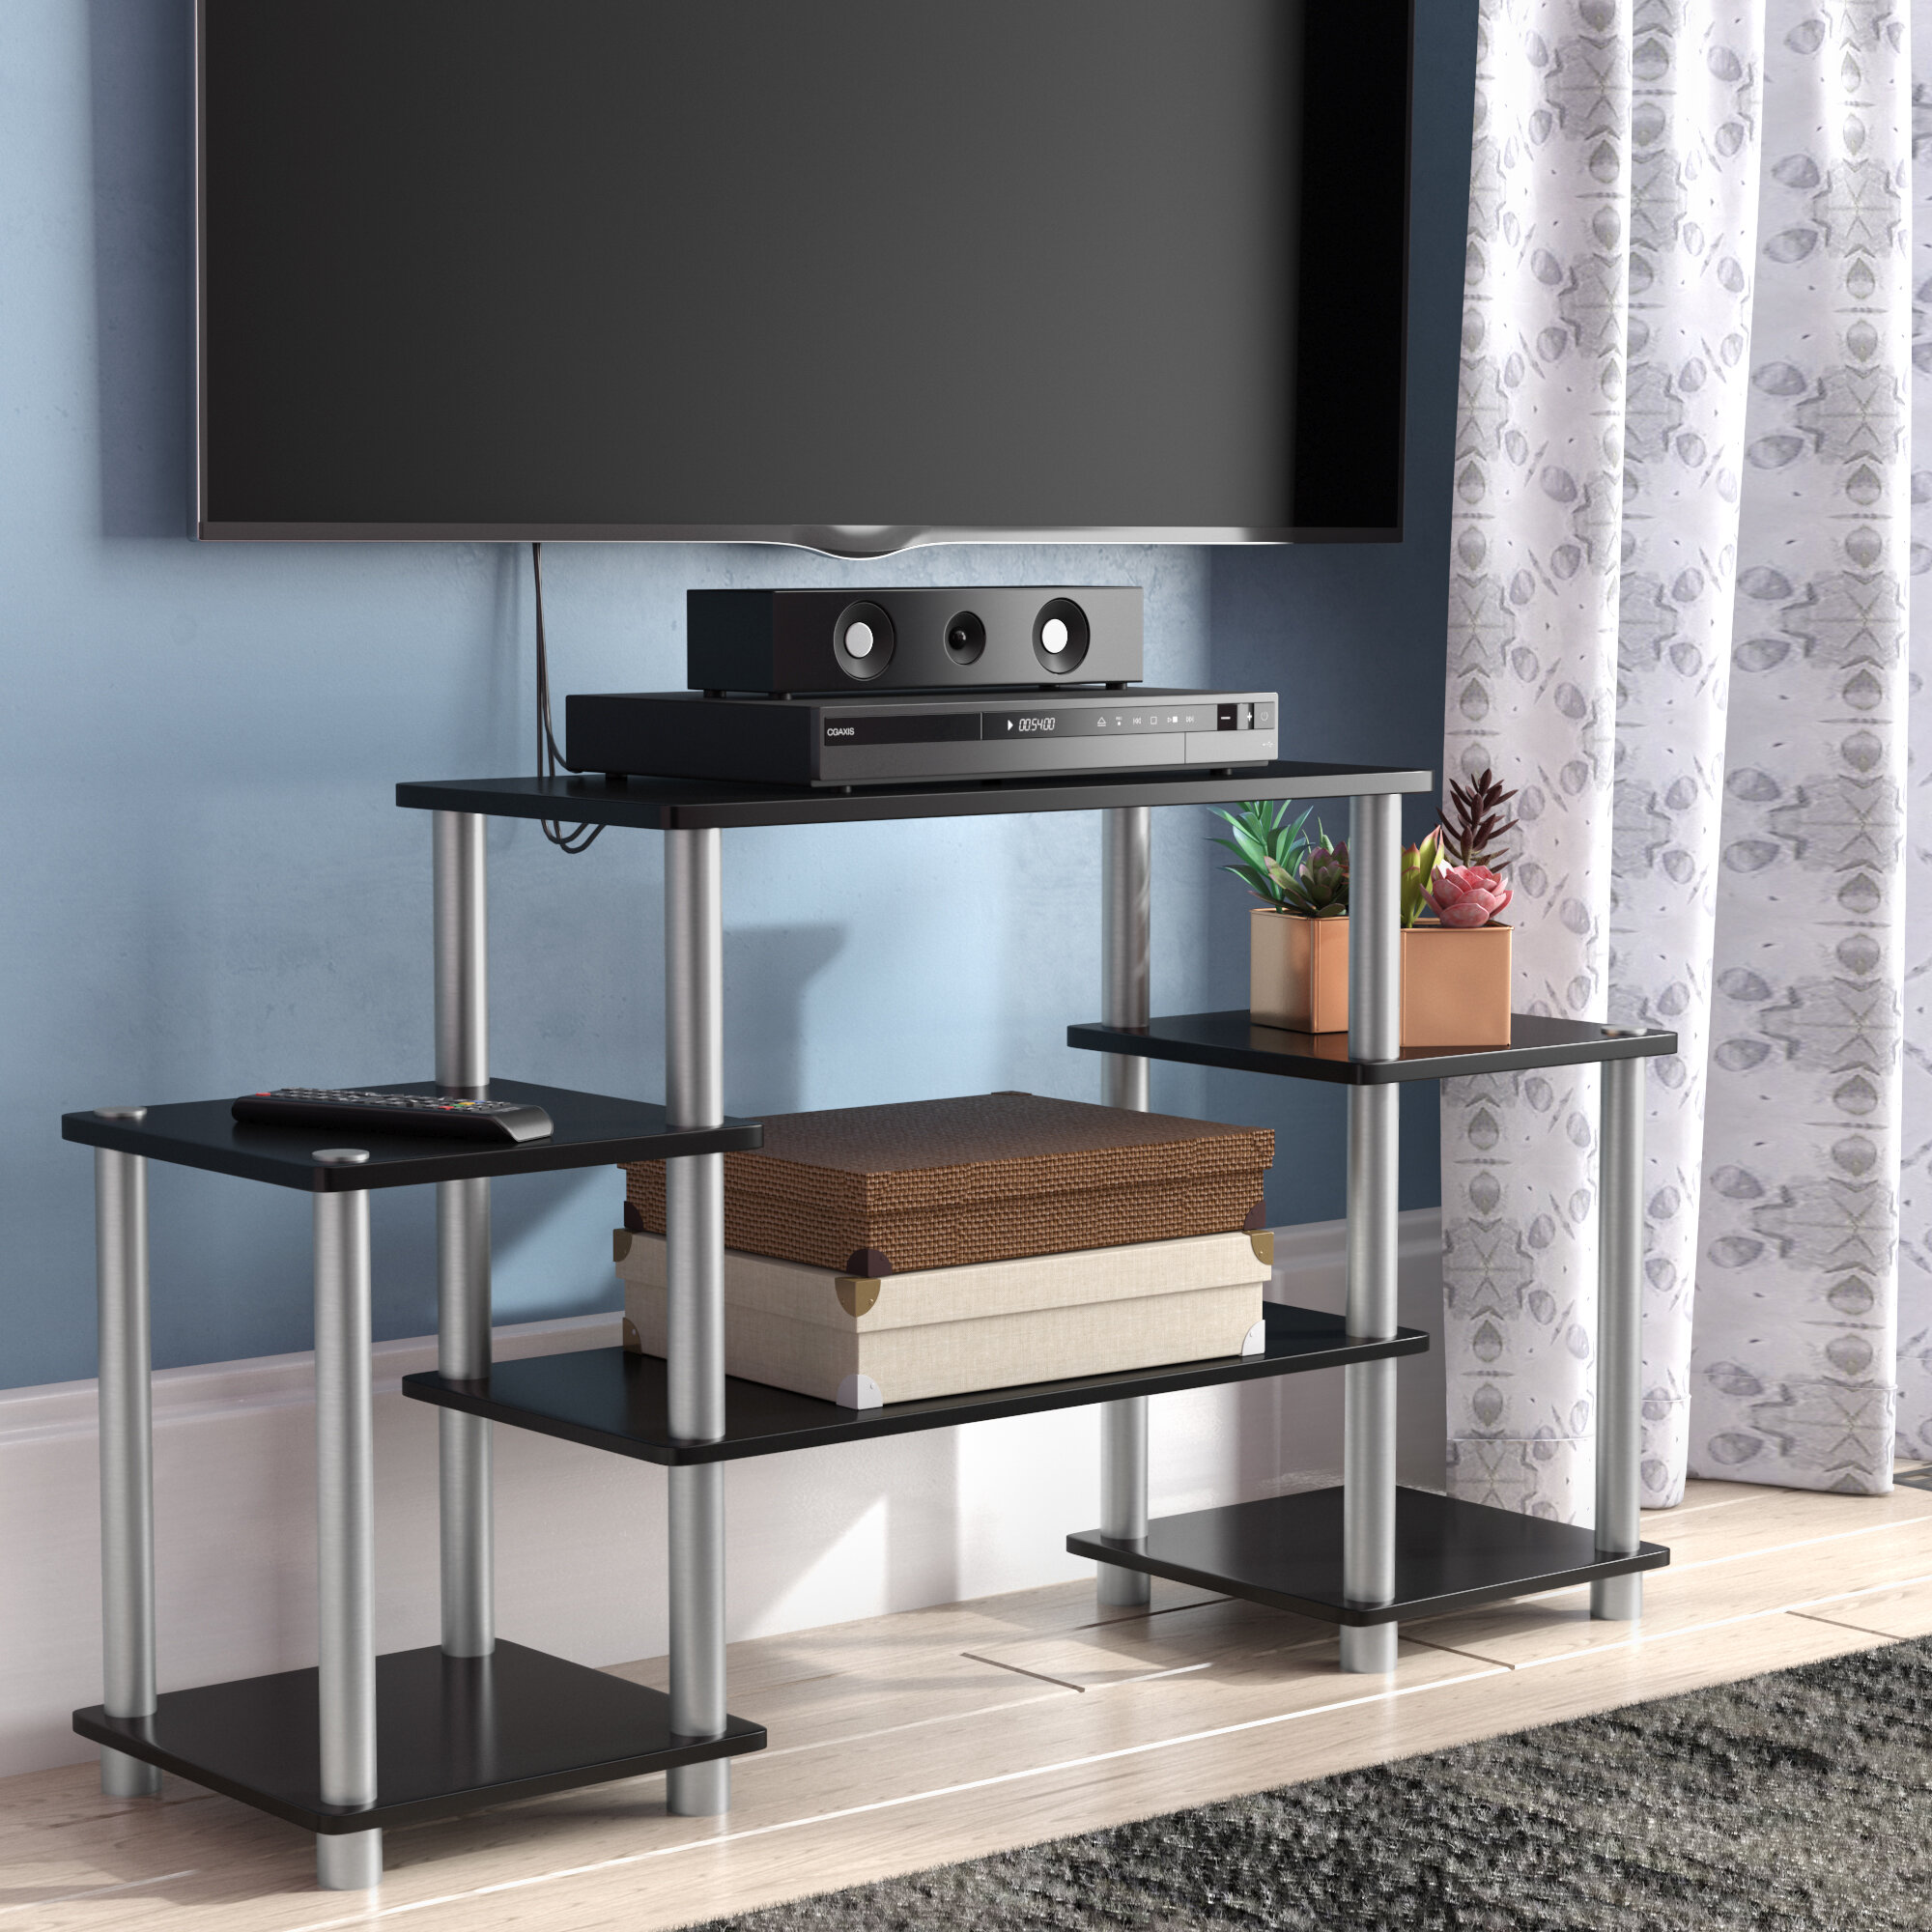 D x13.1 Brown Faux Marble/Black Short 43.3 H W x13.4 Furinno Nelly Entertainment Center TV Stand 